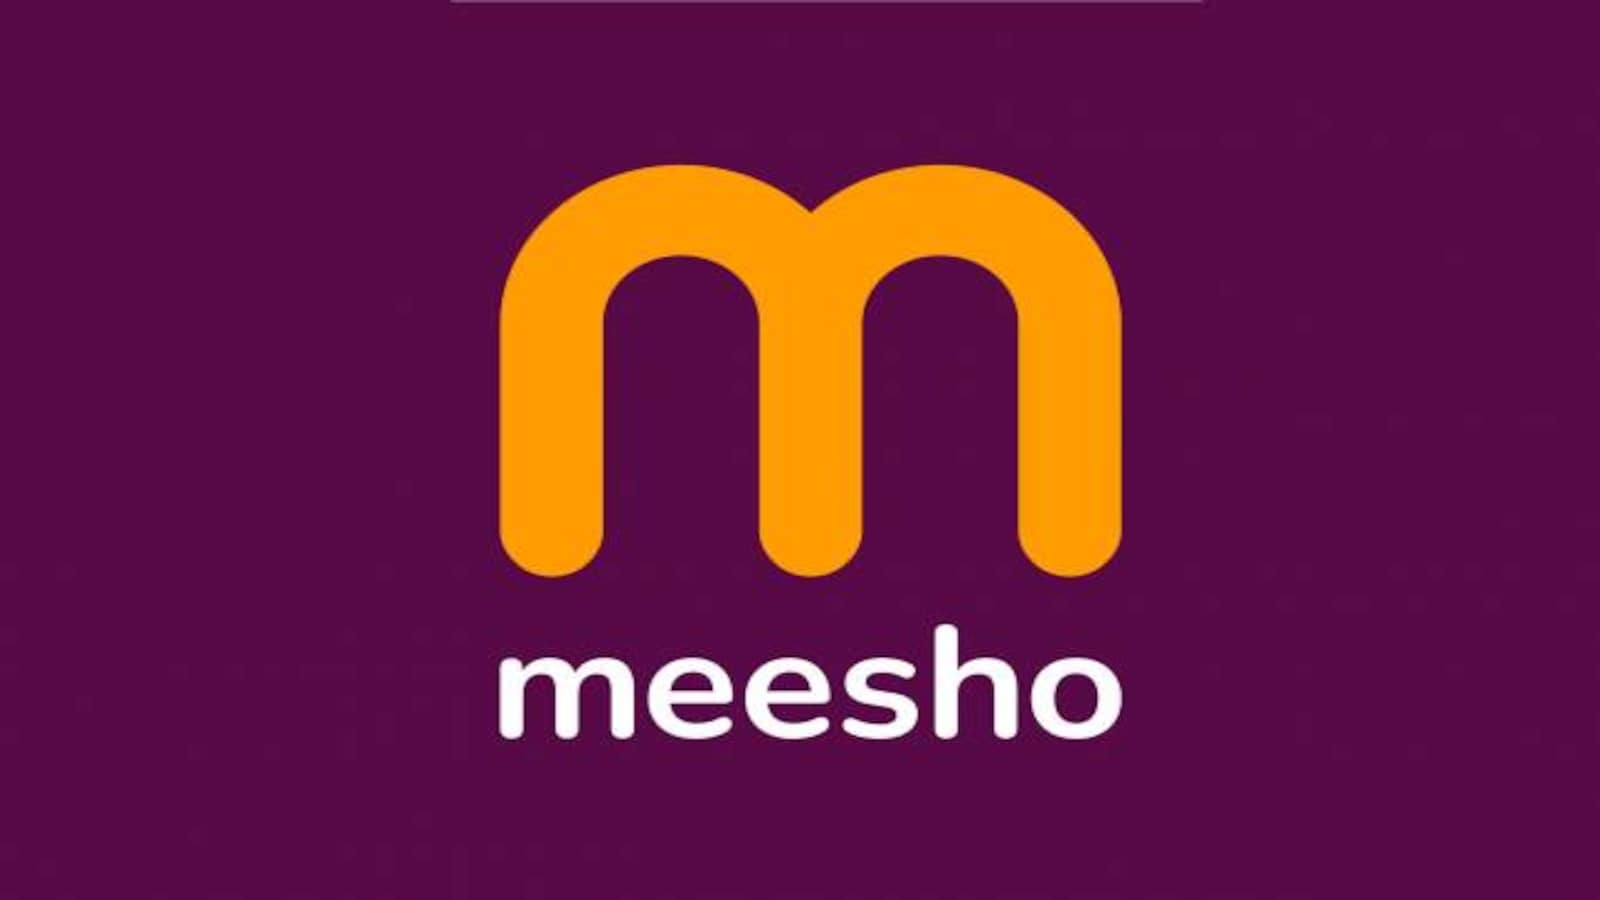 Meesho unveils new logo to appeal to wider audience